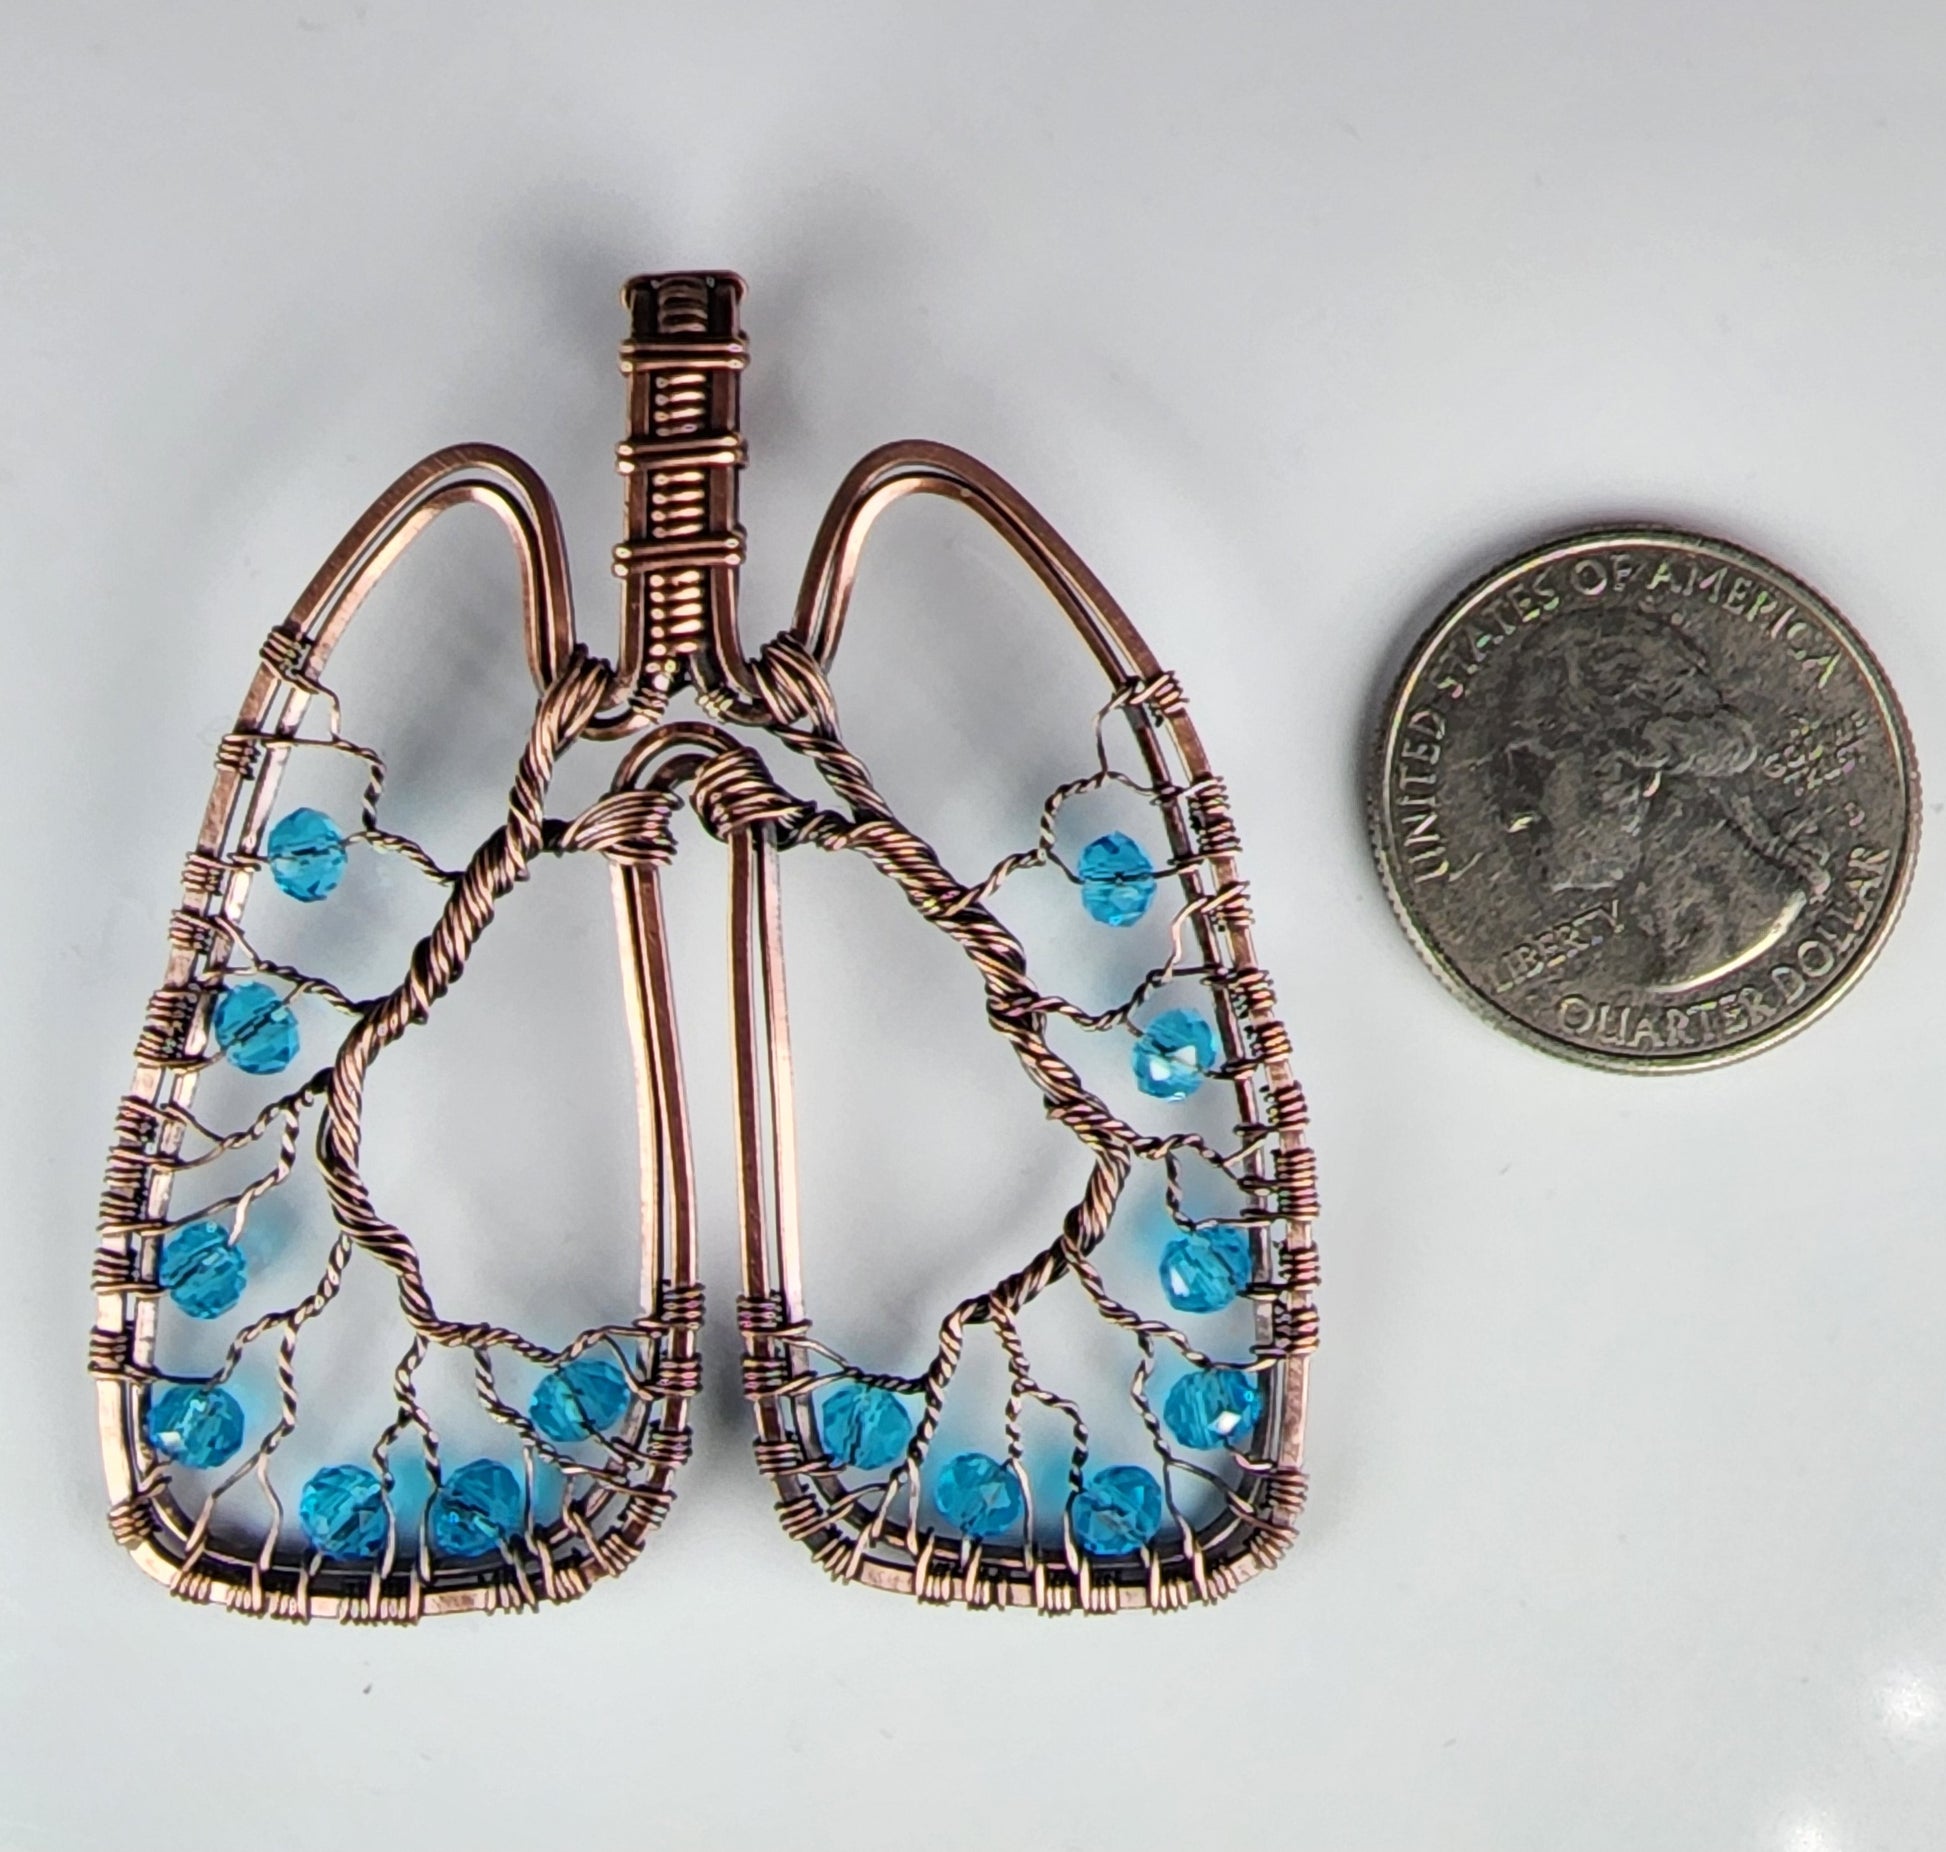 Anatomical Lungs Pendant with Pale Blue Beads Wire Wrapping Artist: Lindsey Griffin  Oxidized Polished Copper wire  Pale Blue High Quality glass beads  Perfect and unique gift for a specialist, doctor, nurse, therapist and more, who deals with lungs and pulmonary  Widest horizontal measurement - 2.25"  Longest vertical measurement: 2 5/8"